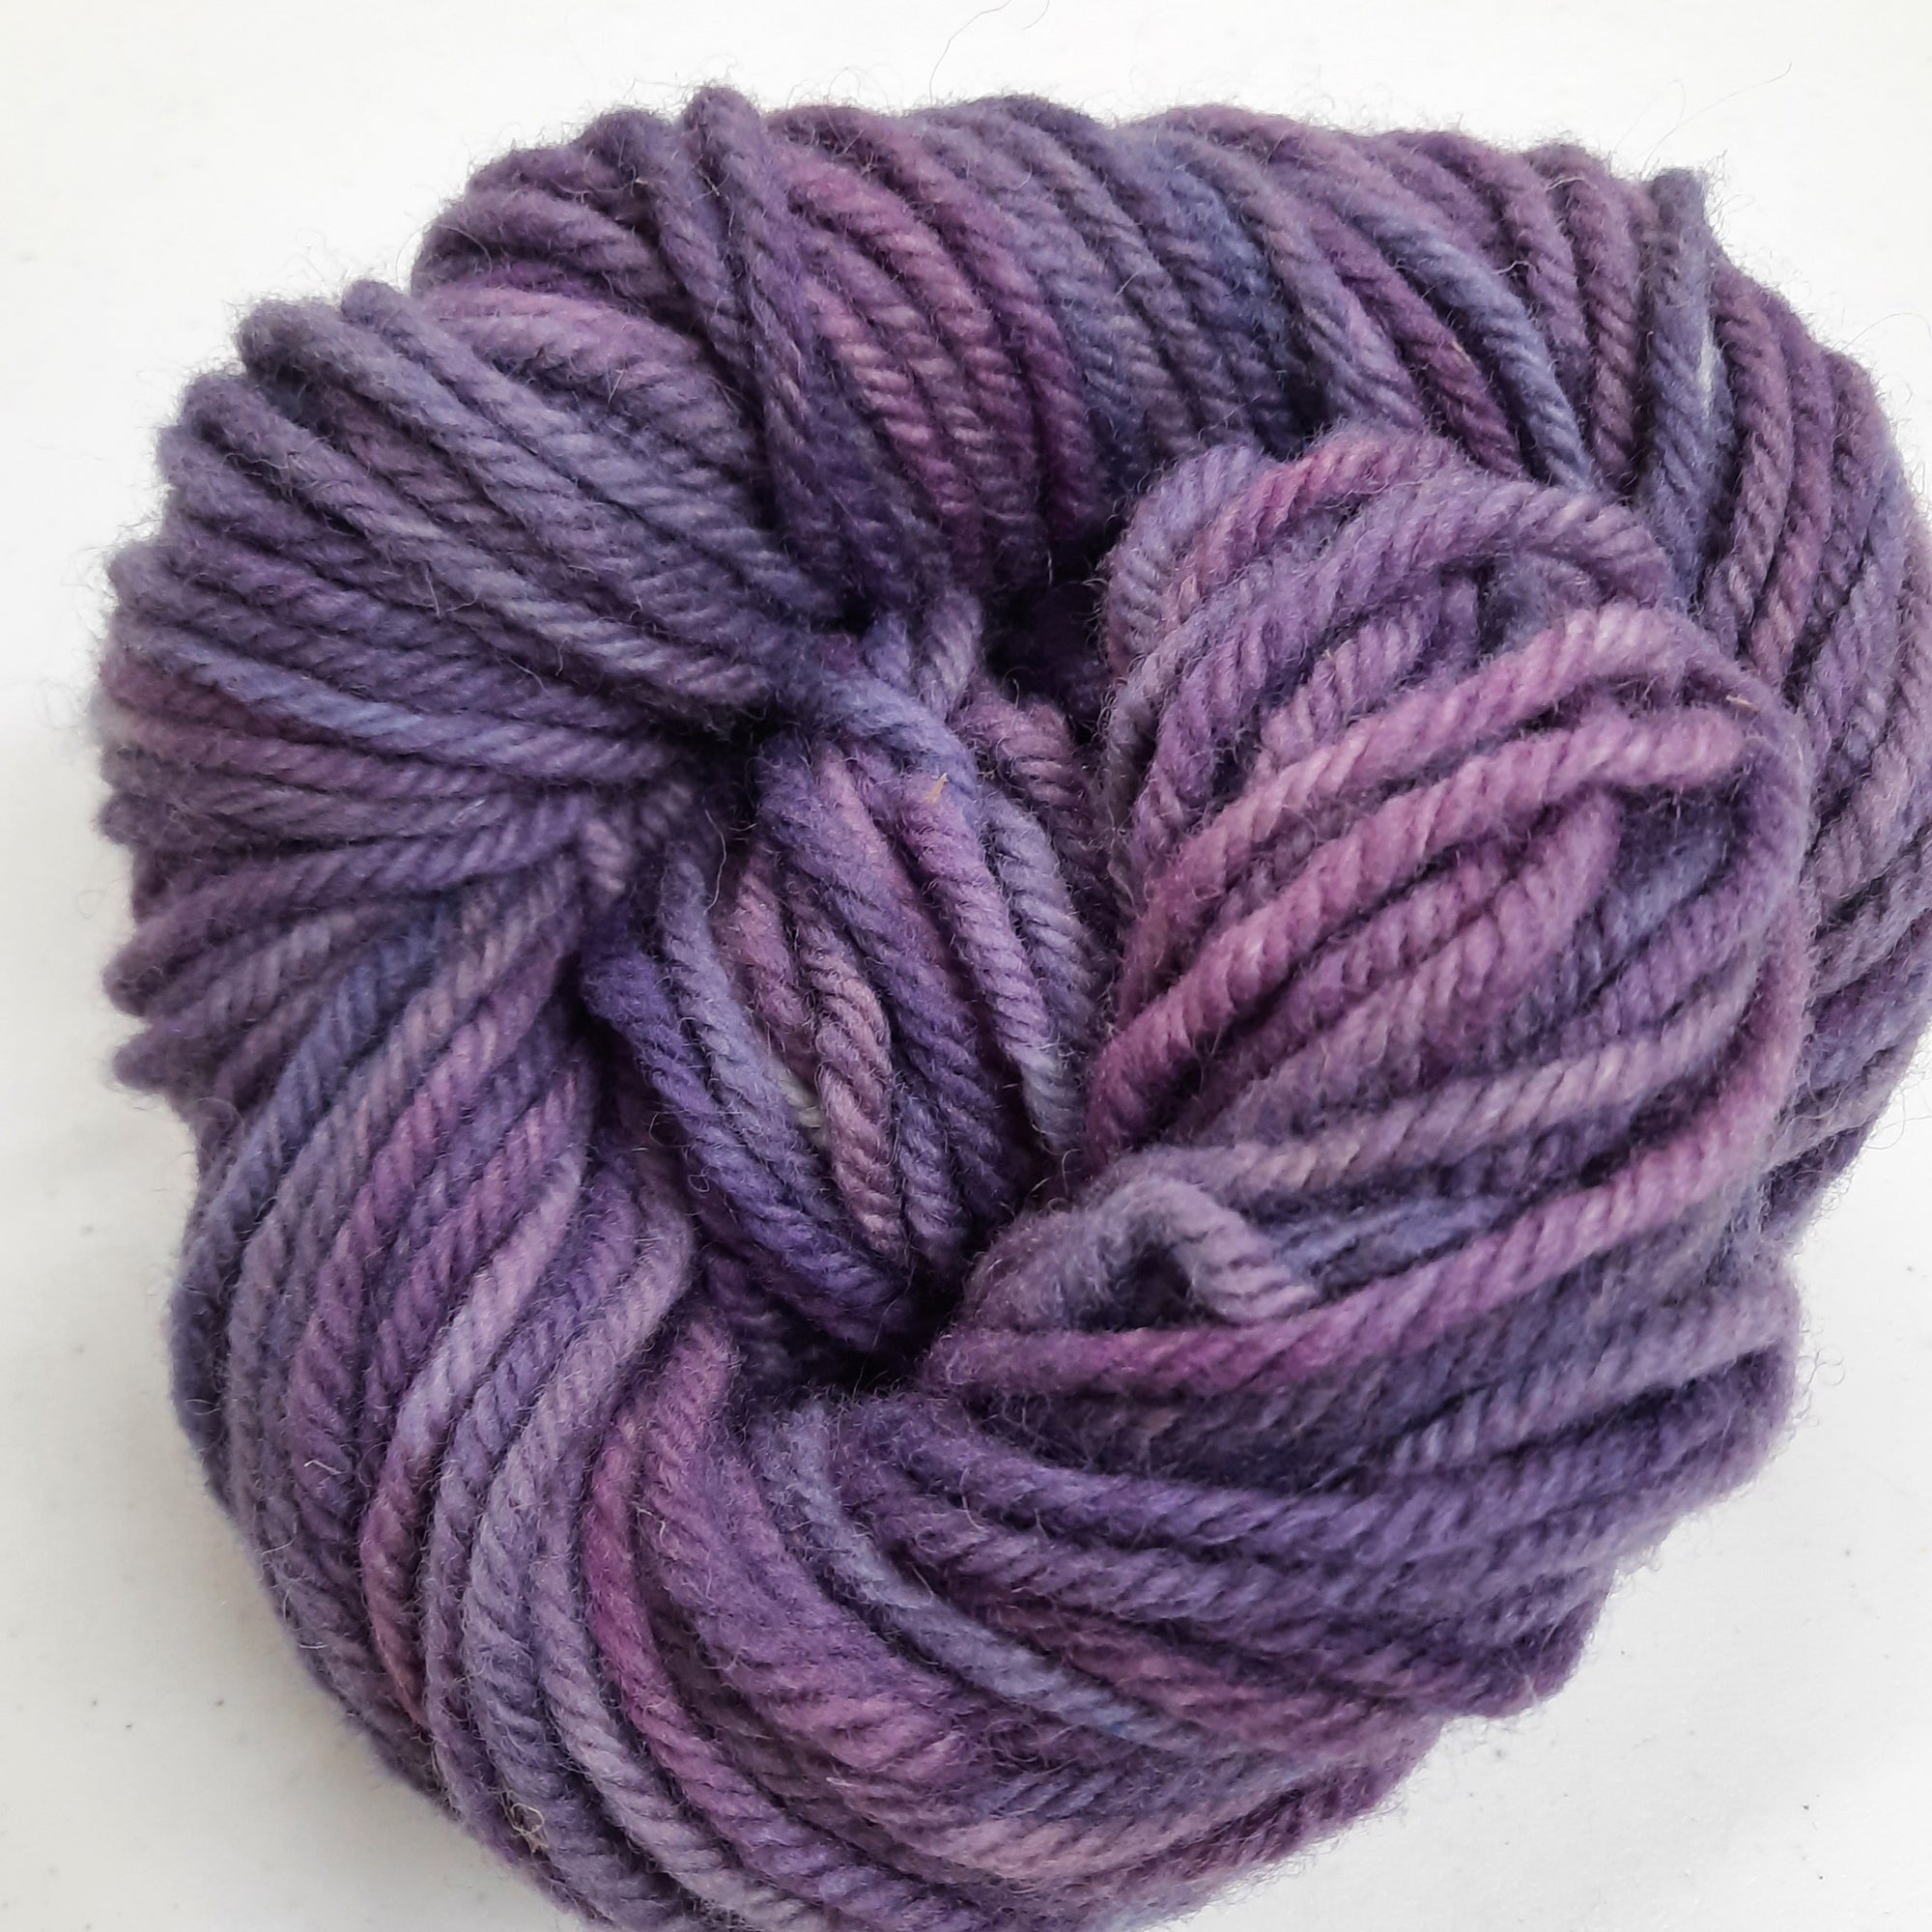 Hand-Dyed Super Bulky  (4 ply) Yarn - Red Violet